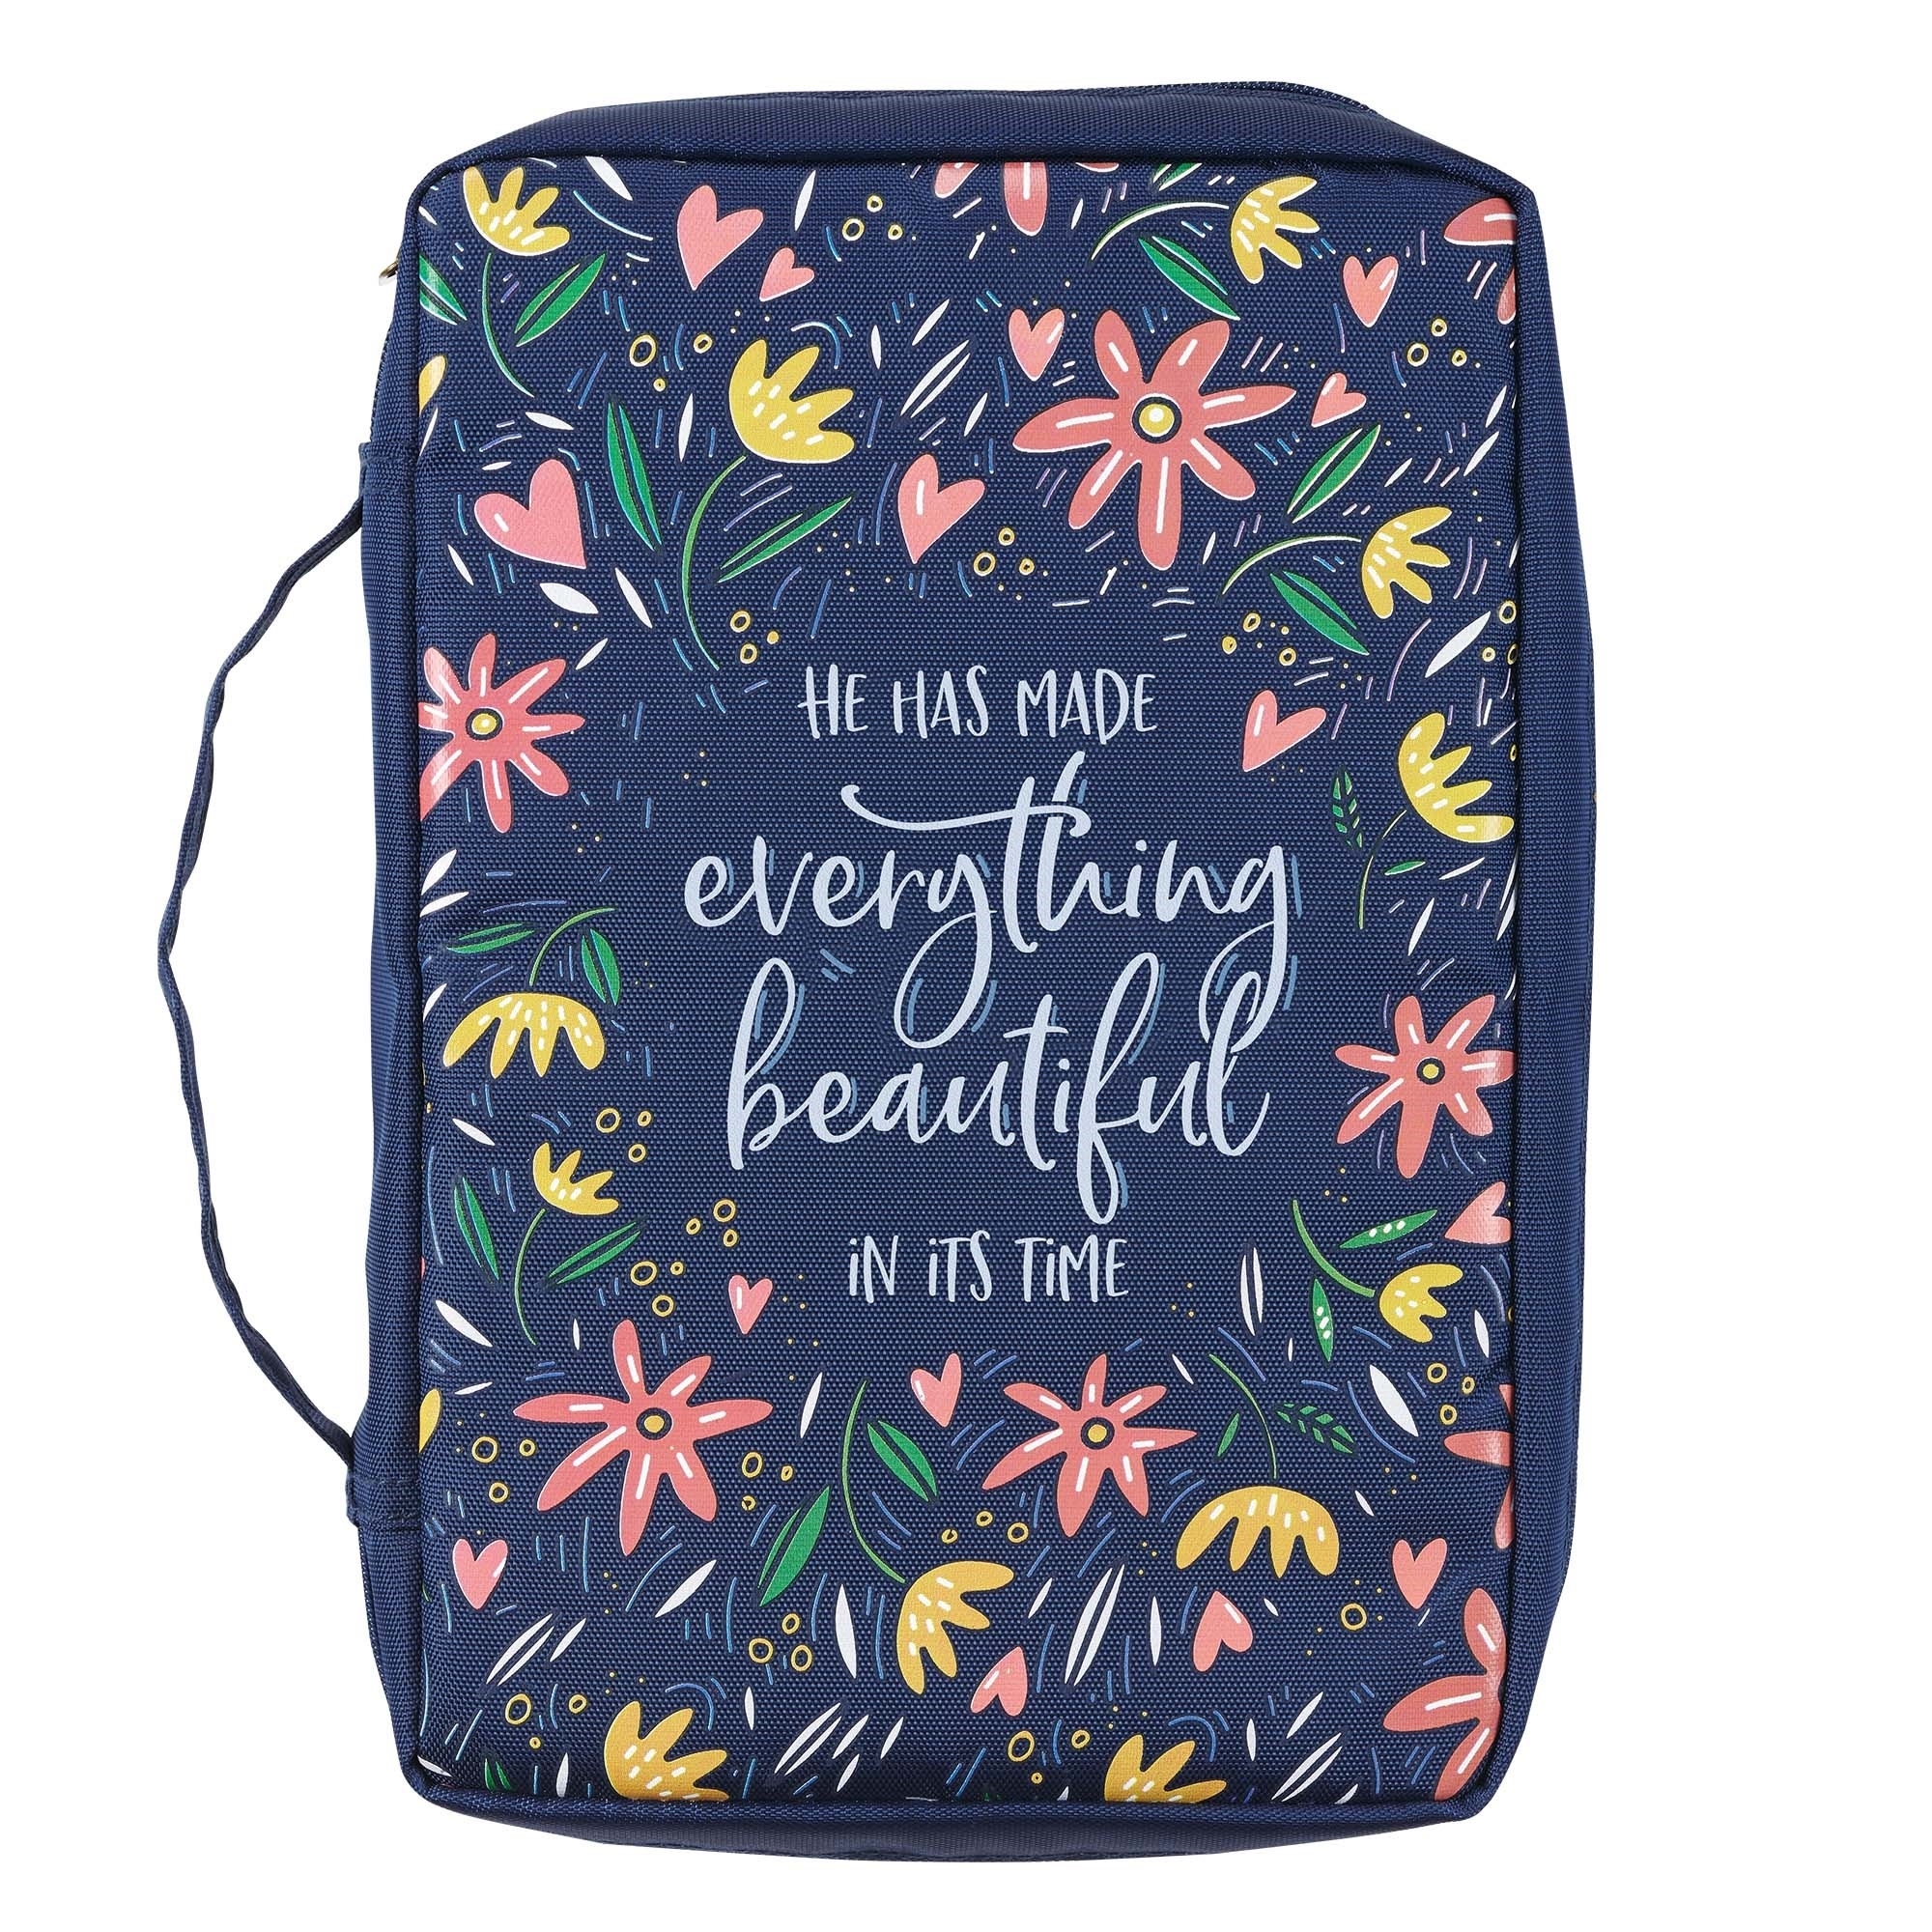 Large He Has Made Everything Beautiful Navy Floral Value Bible Cover - Ecclesiastes 3:11